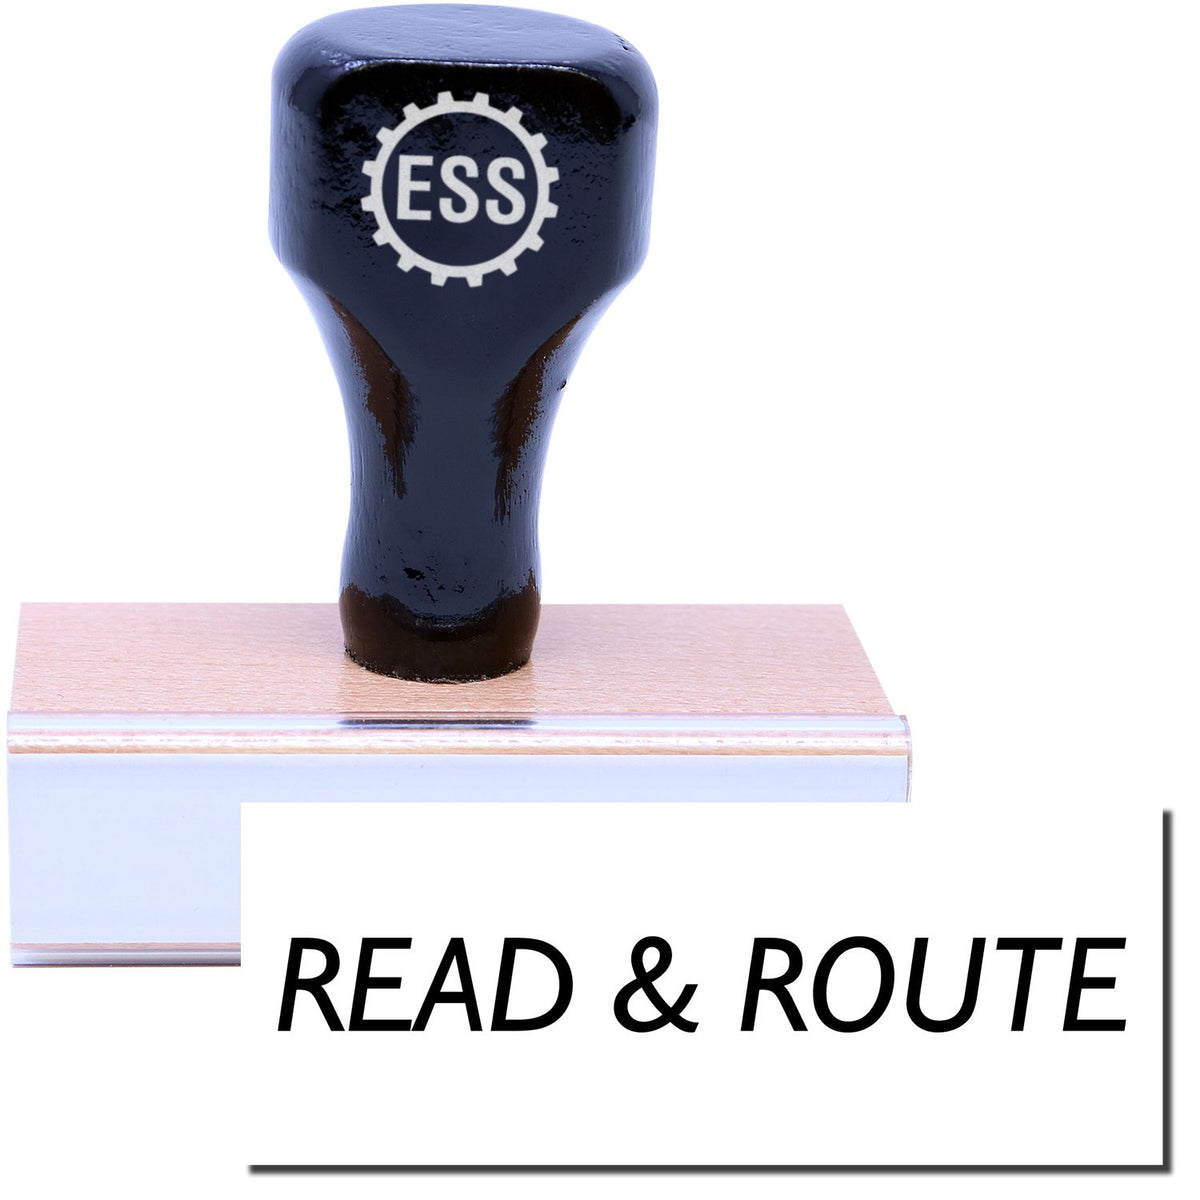 A stock office rubber stamp with a stamped image showing how the text &quot;READ &amp; ROUTE&quot; in a large font is displayed after stamping.